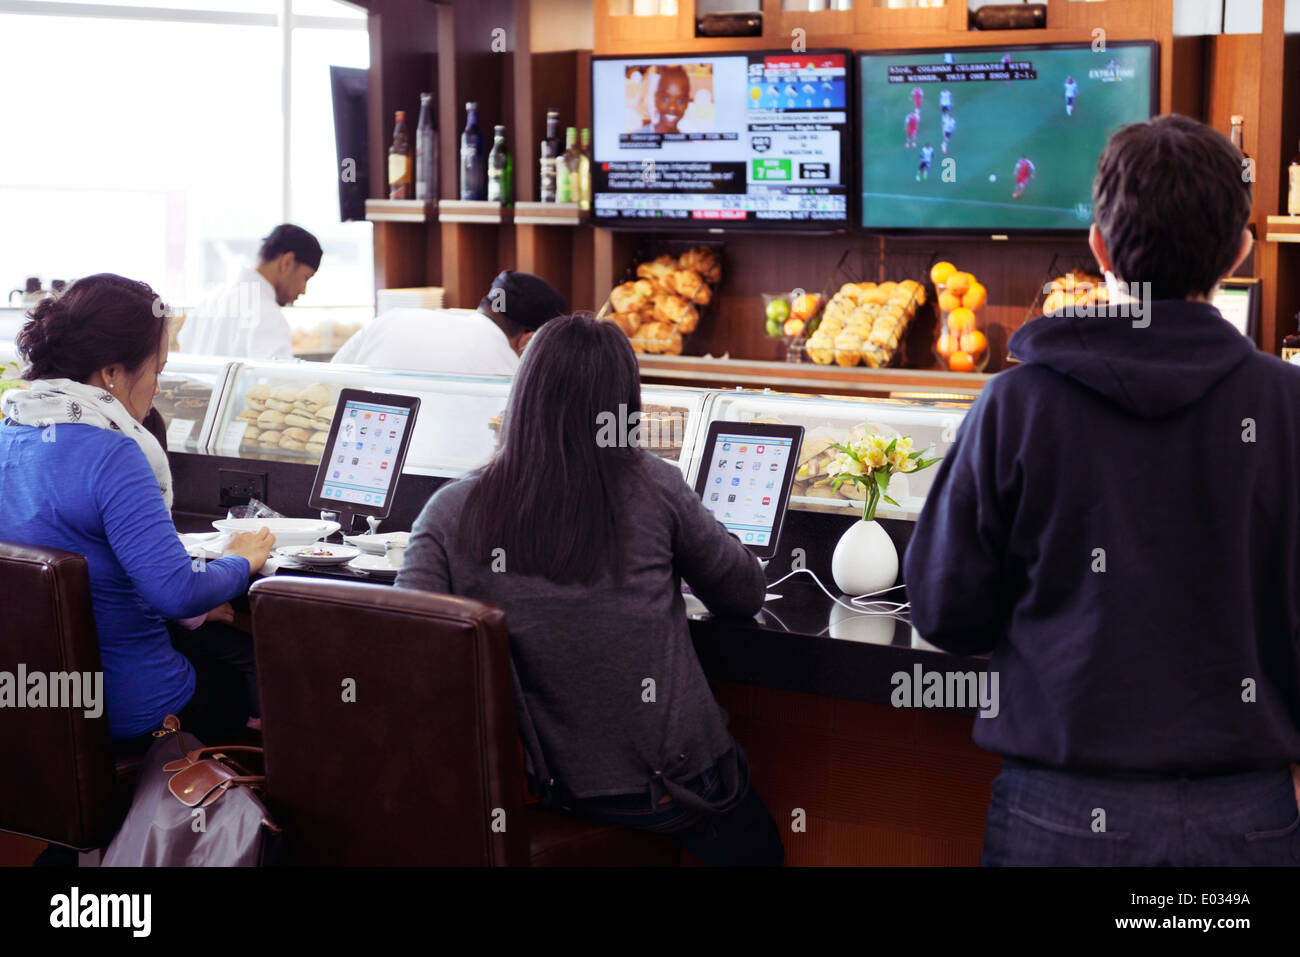 People sitting at a cafe counter with iPads in front of them. Toronto Pearson International airport. Stock Photo